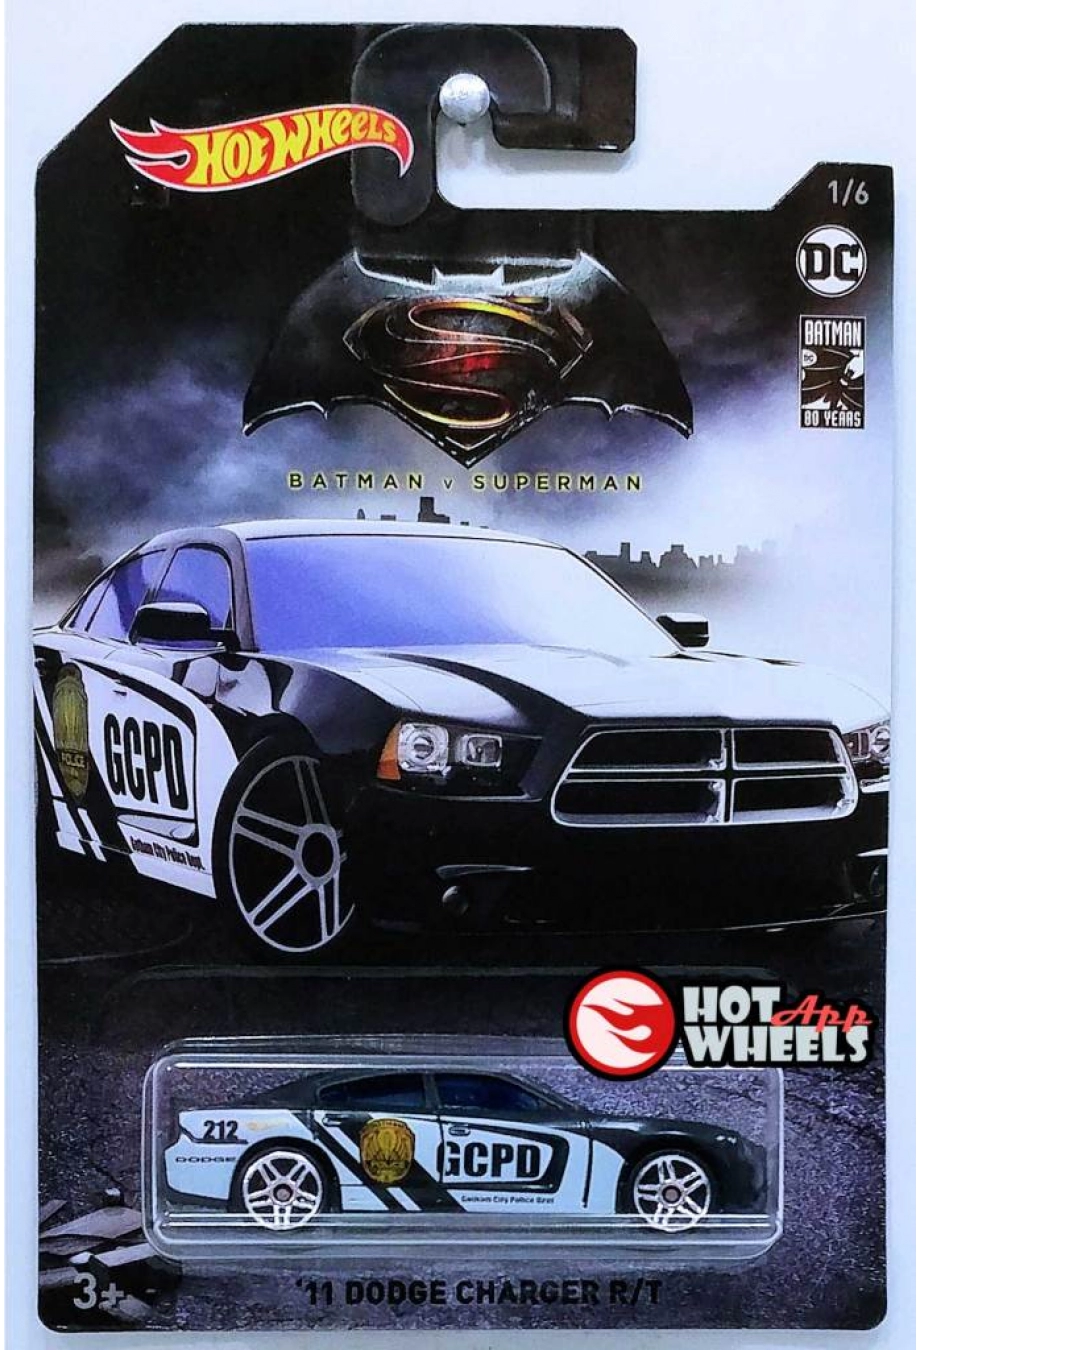 NP16 Hot Wheels '11 Dodge Charger R/T 2019-158 